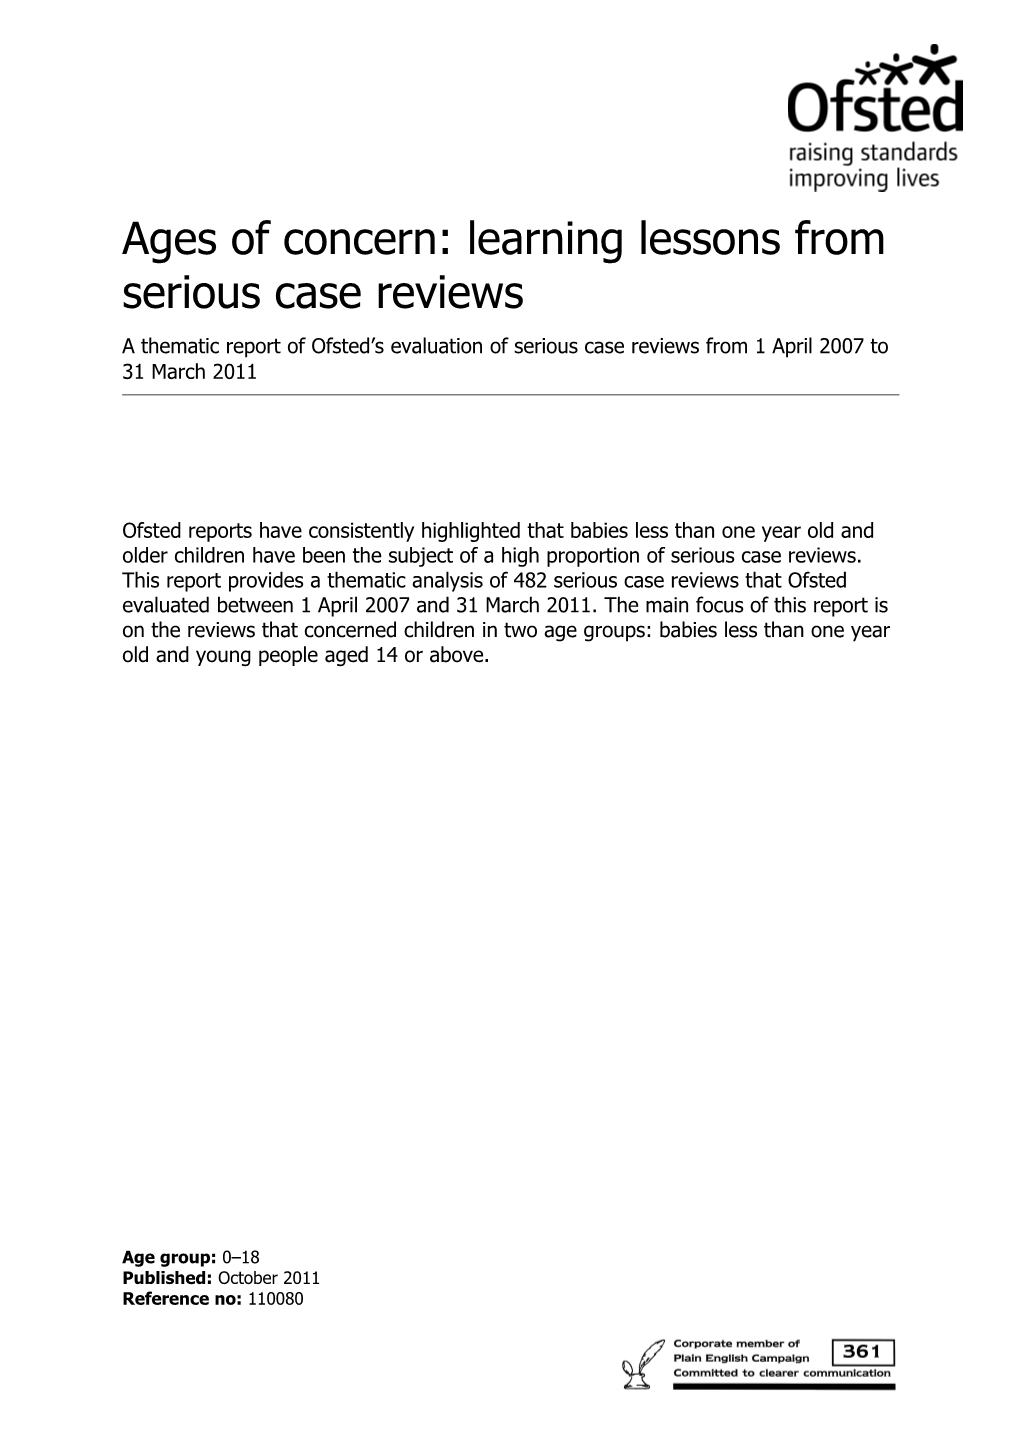 Ages of Concern: Learning Lessons from Serious Case Reviews